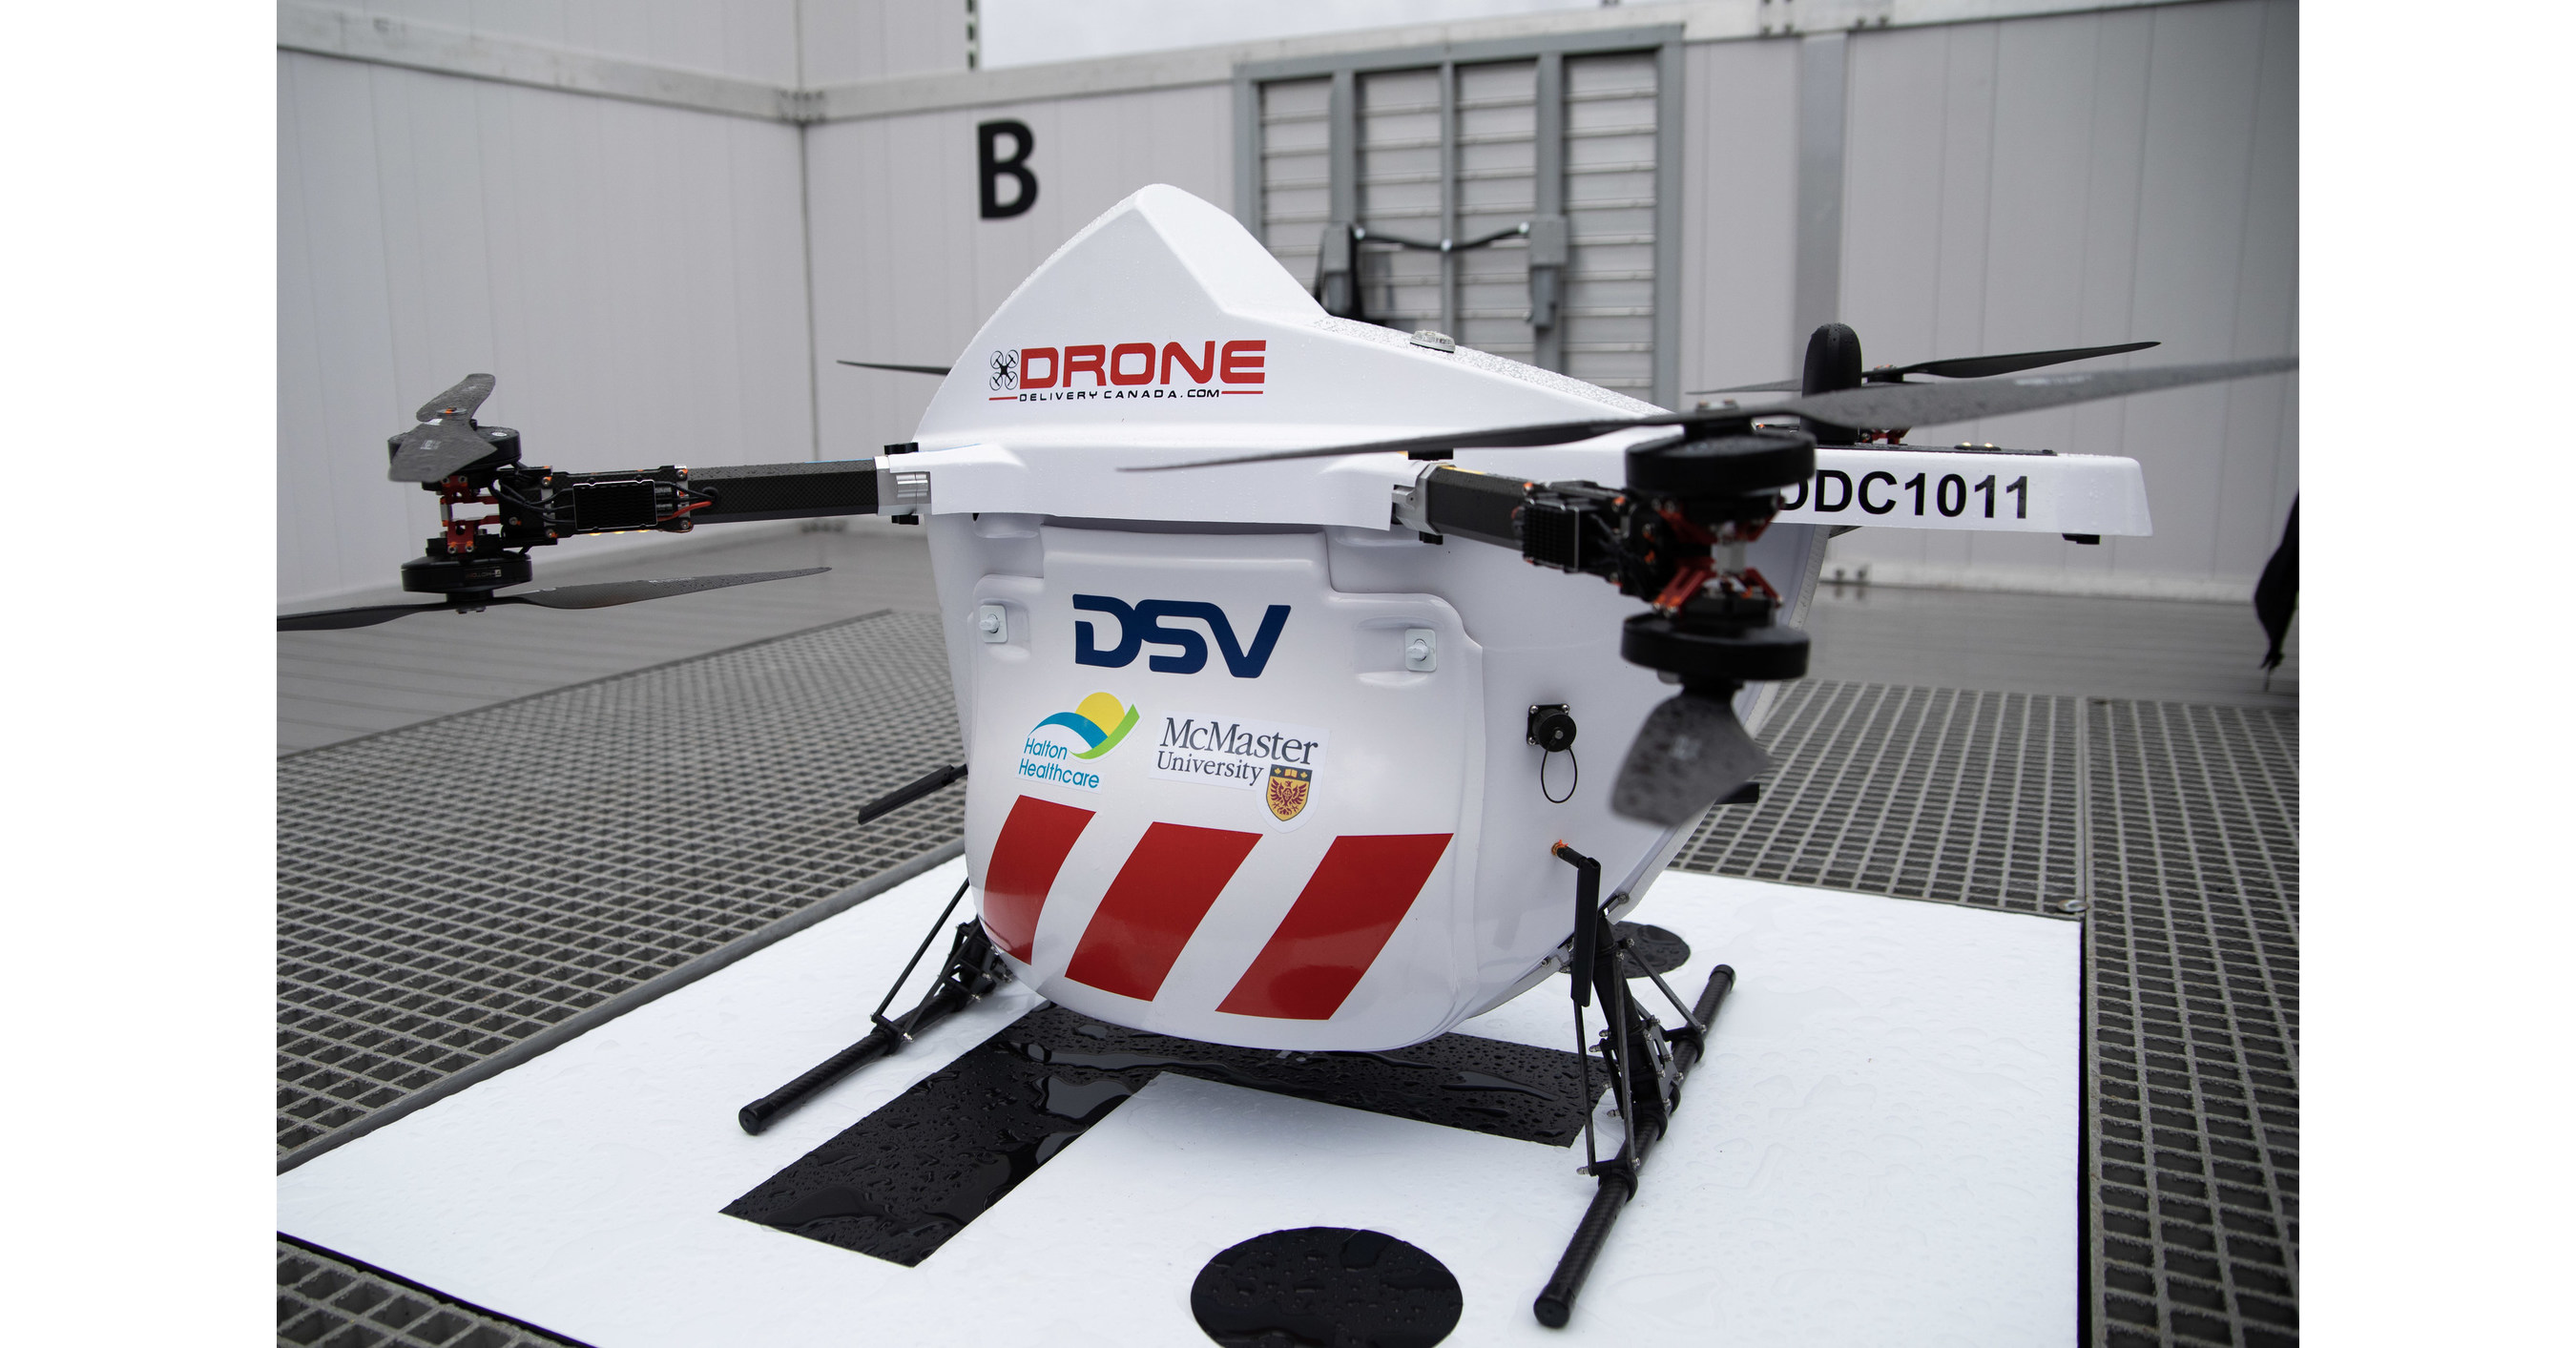 DRONE CANADA CARE BY AIR PROJECT WITH HALTON & CANADA COMMERCIALLY OPERATIONAL